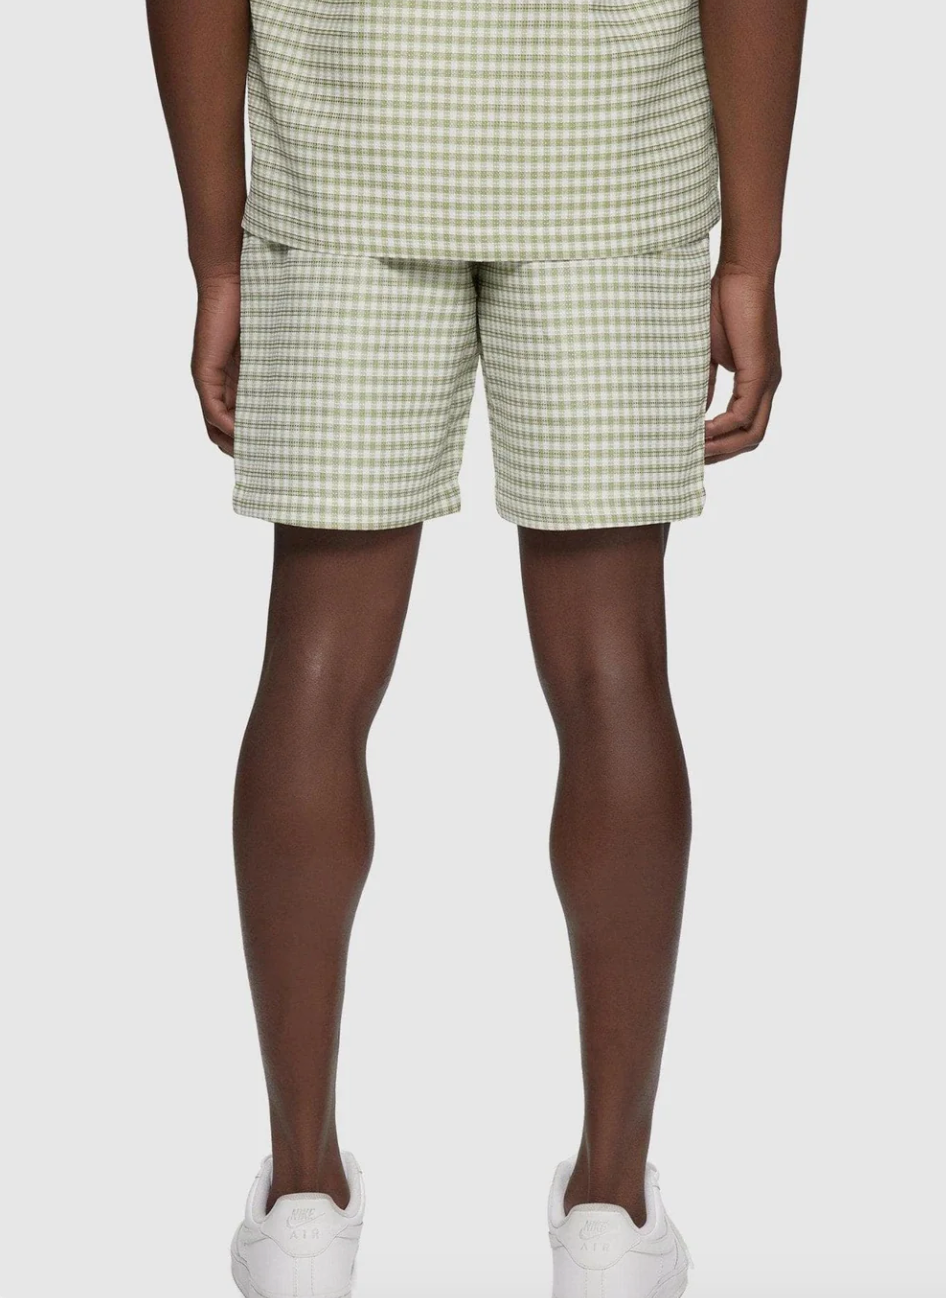 Available for Rental | Kuwallatee Checkered Shorts | Light Green